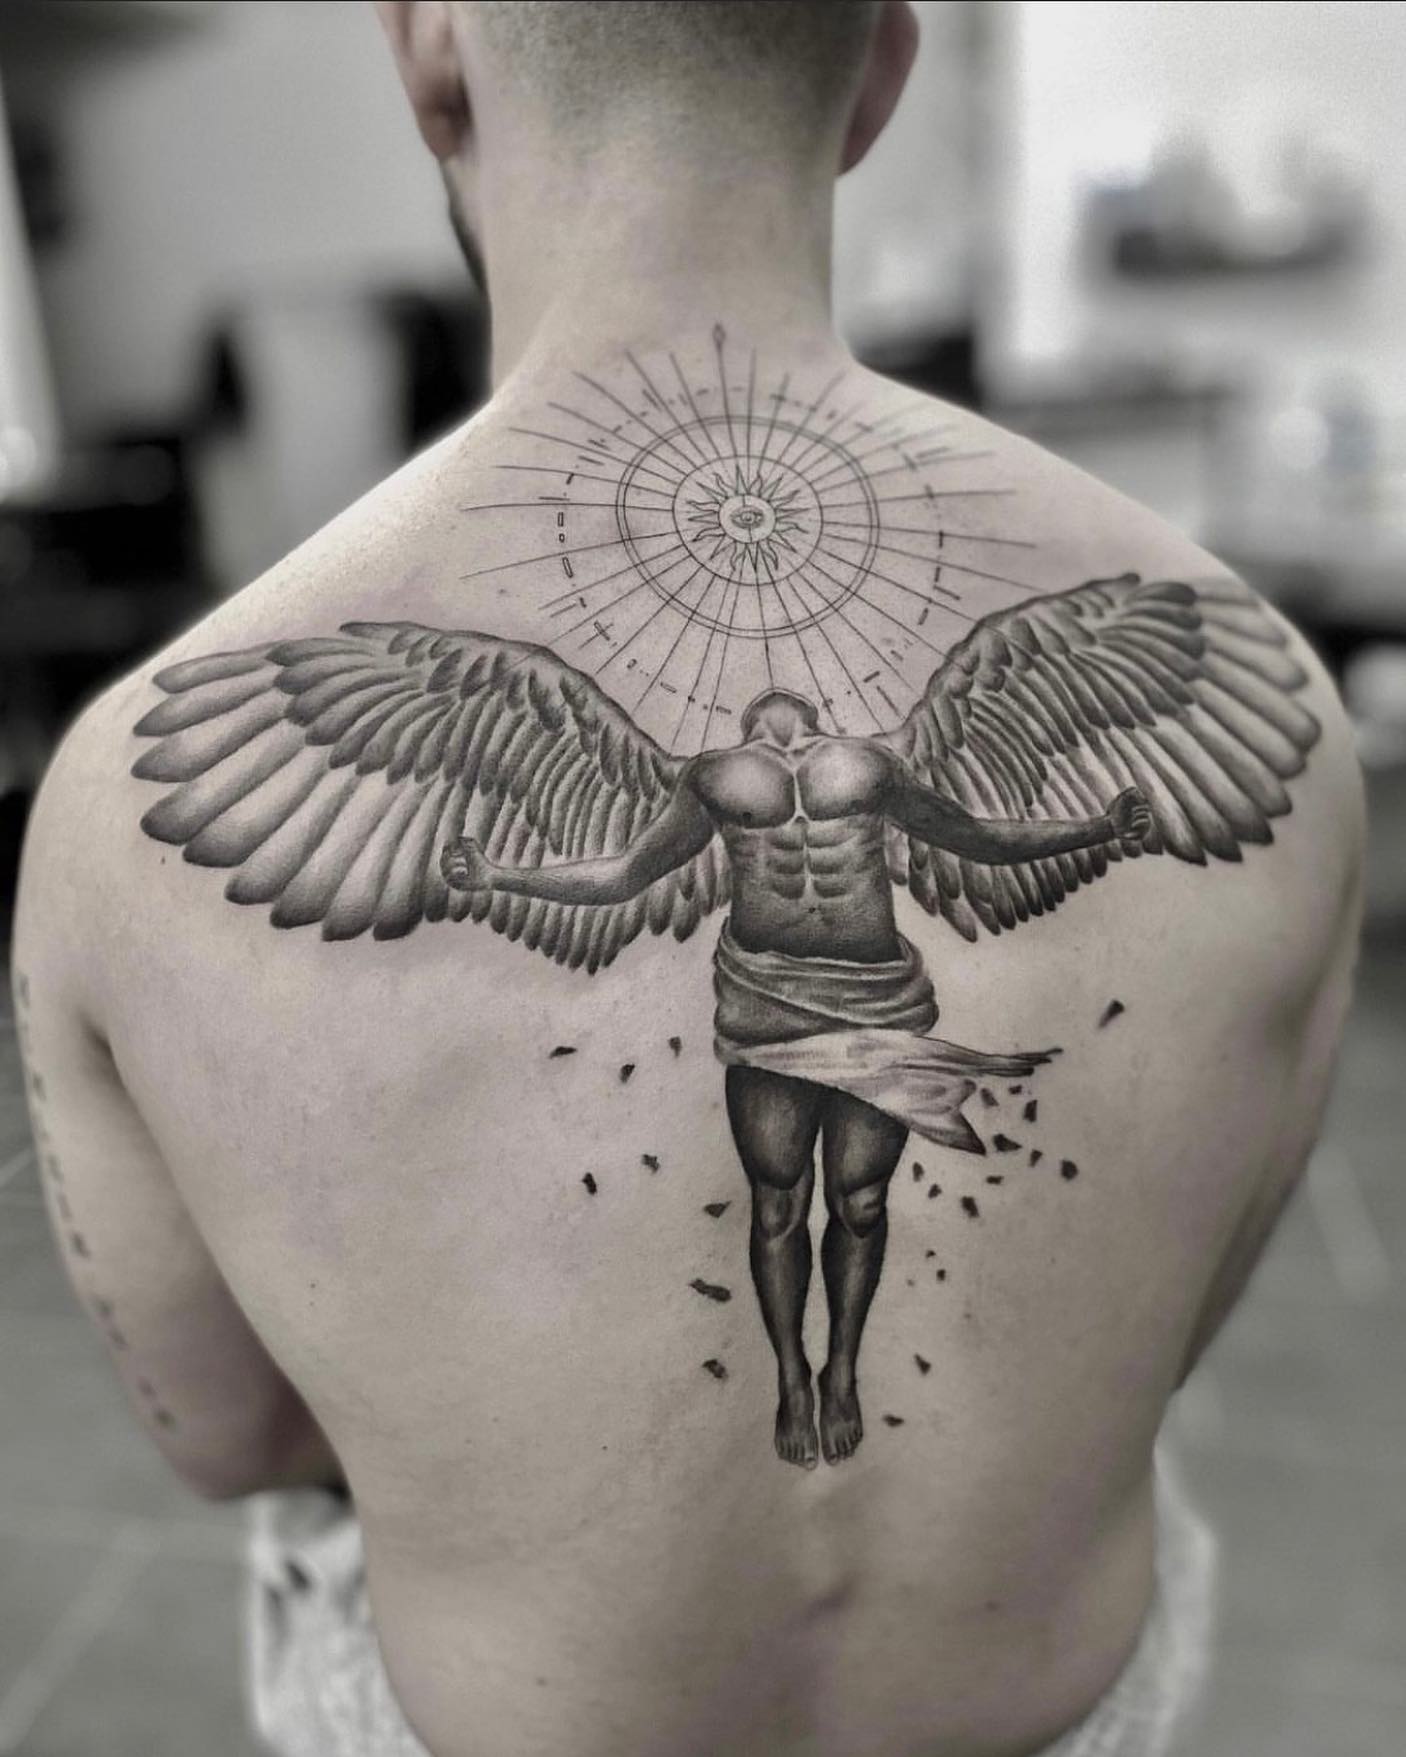 60 Icarus Tattoo Designs For Men  Manly Greek Mythology Ideas  Cloud  tattoo Cloud tattoo design Icarus tattoo